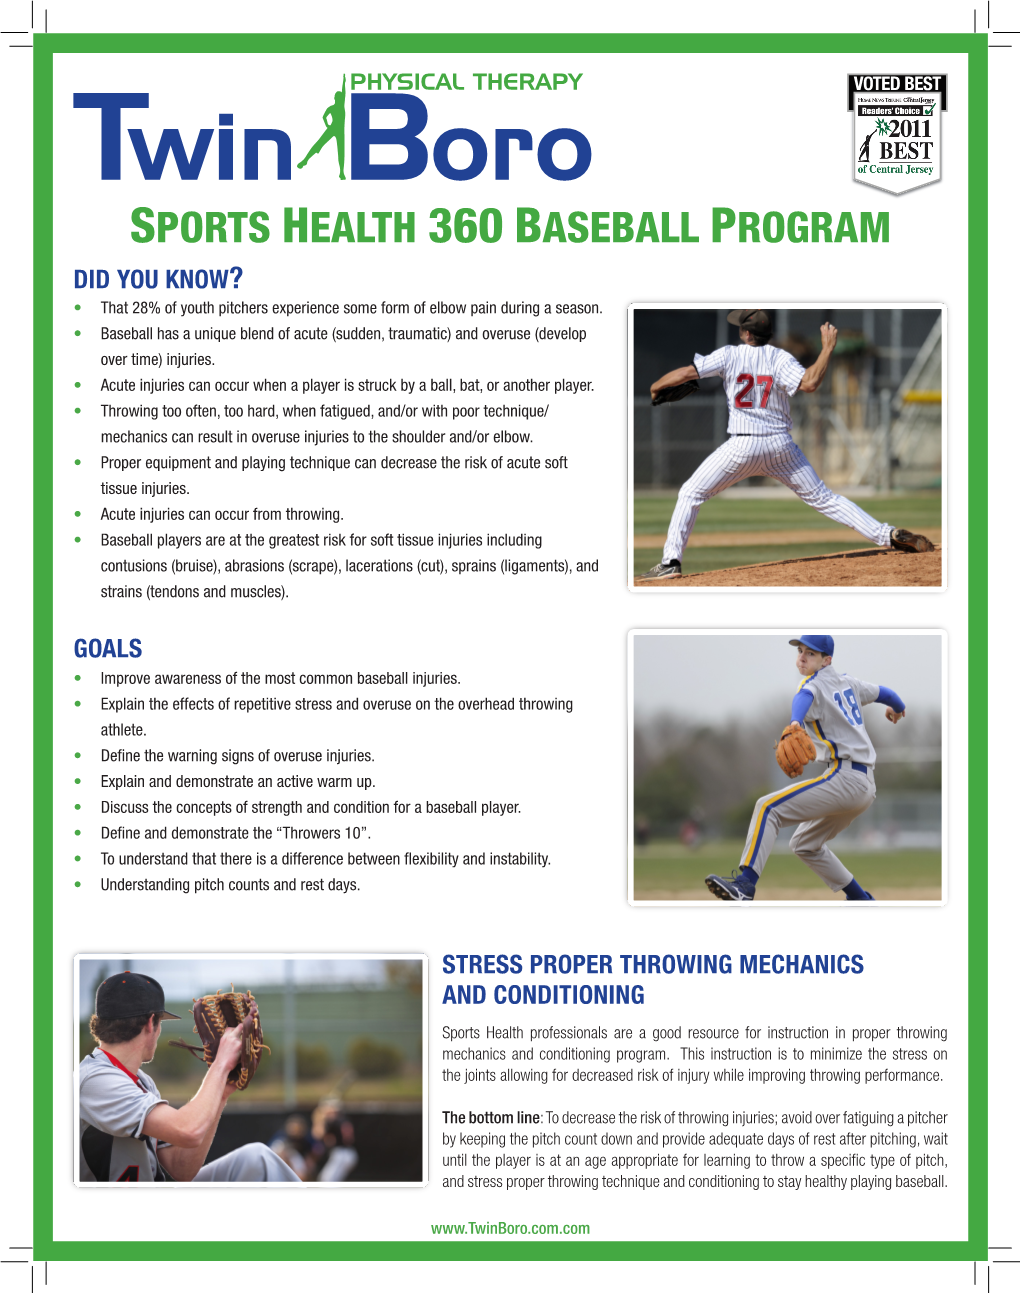 SPORTS HEALTH 360 BASEBALL PROGRAM DID YOU KNOW? • That 28% of Youth Pitchers Experience Some Form of Elbow Pain During a Season